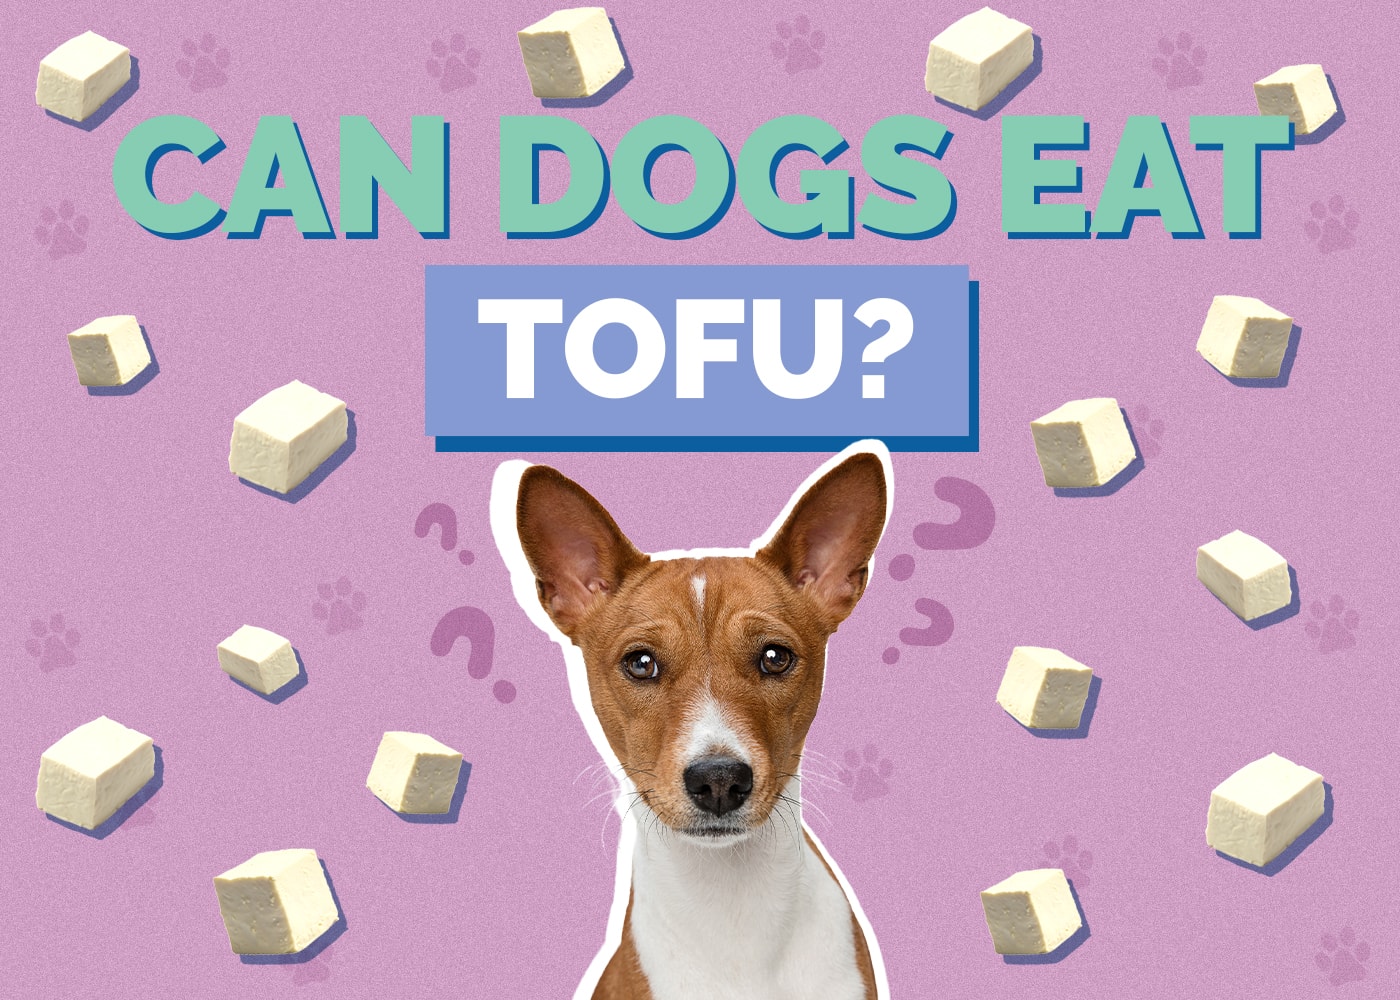 Can Dogs Eat Tofu